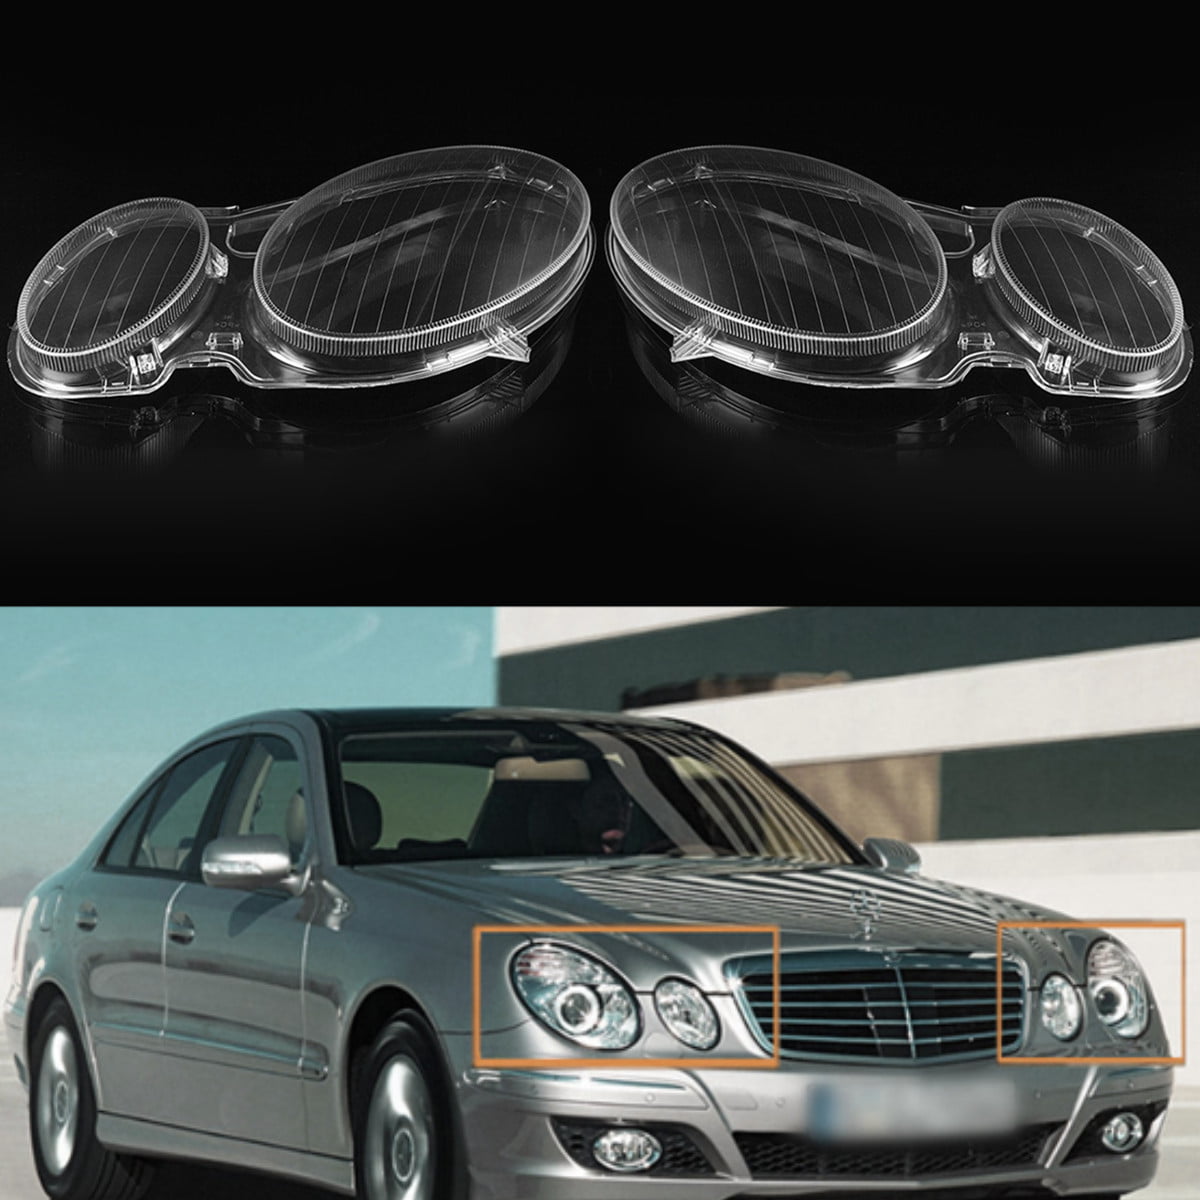 Pair Left & Right Headlight Clear Lens Replacement Cover for Benz W211 E200 E300 E350 2002-2008 